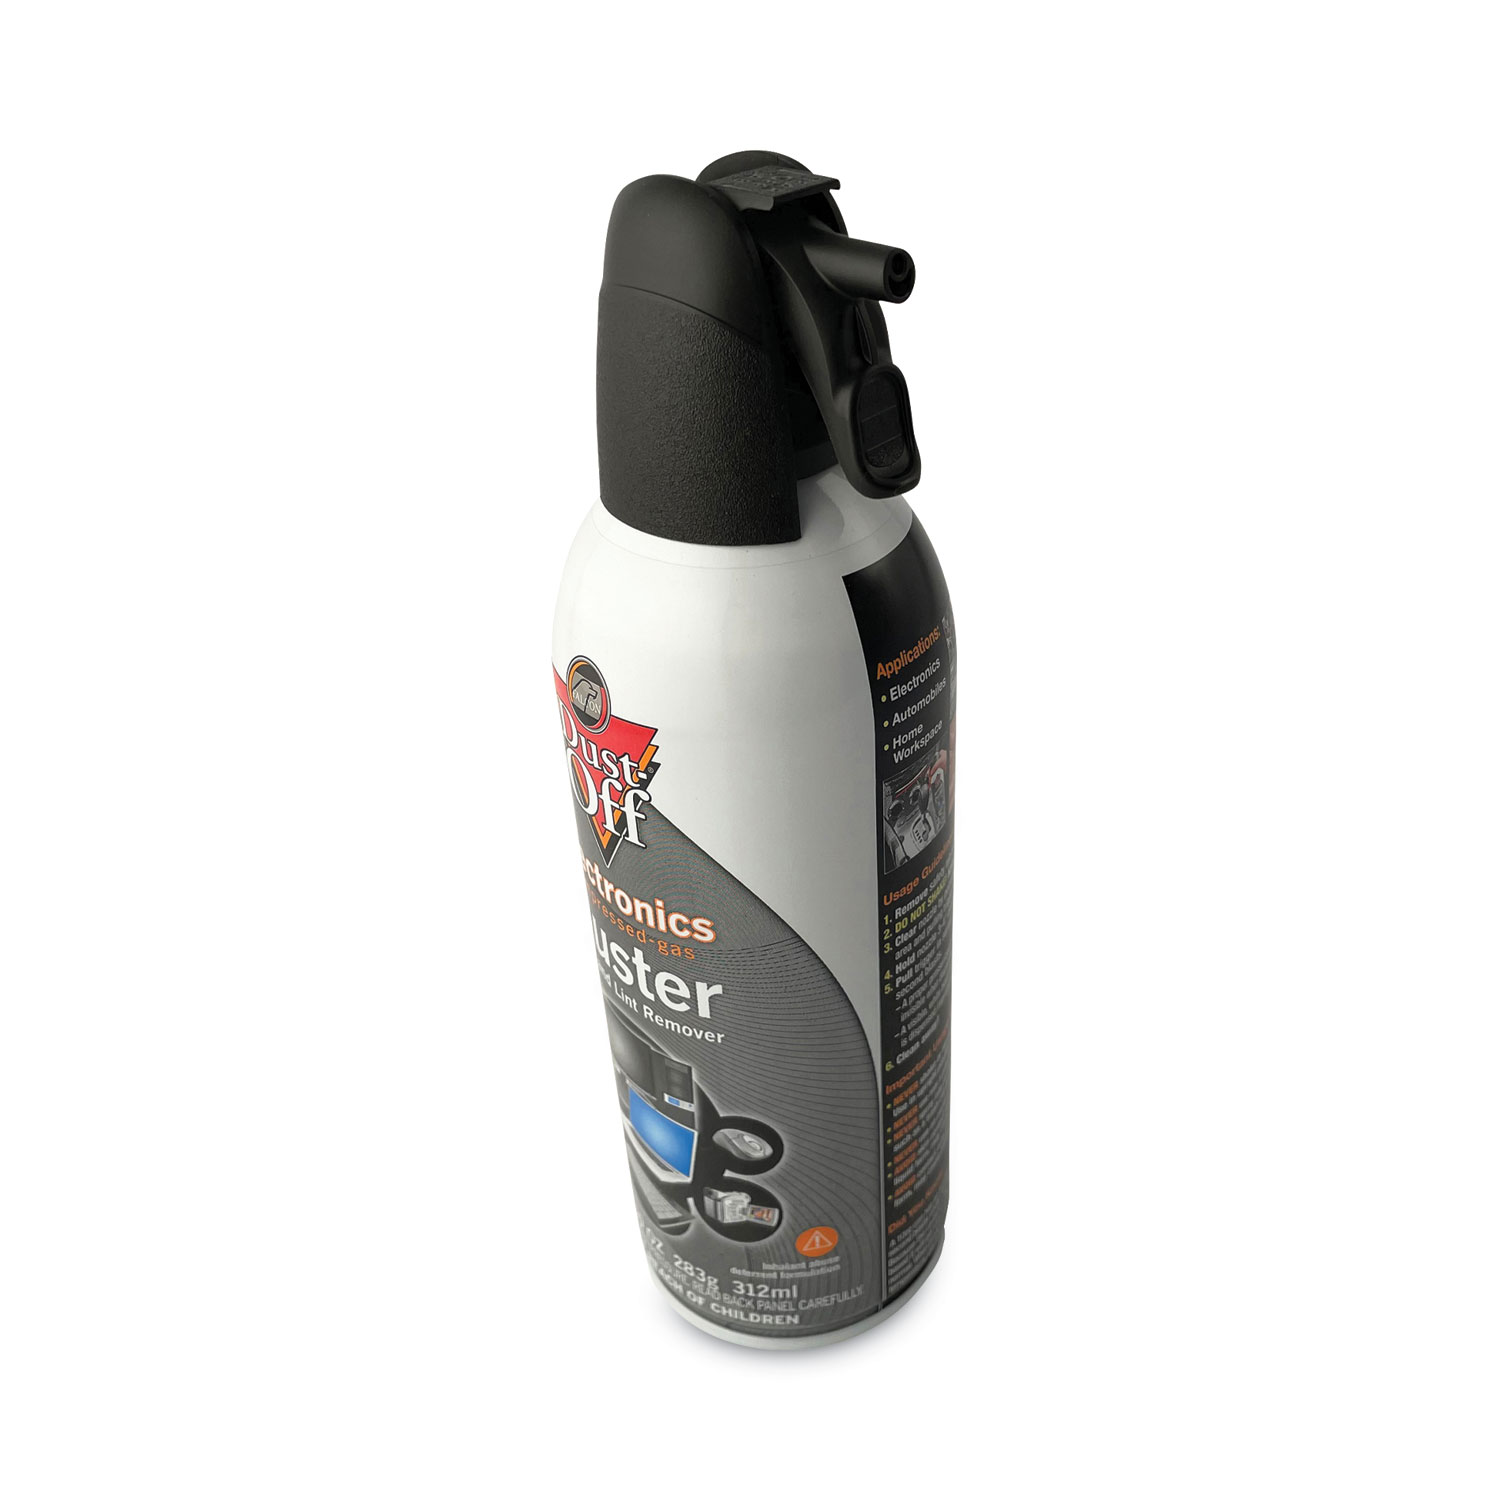 Dust-Off 7-oz Lint Remover at